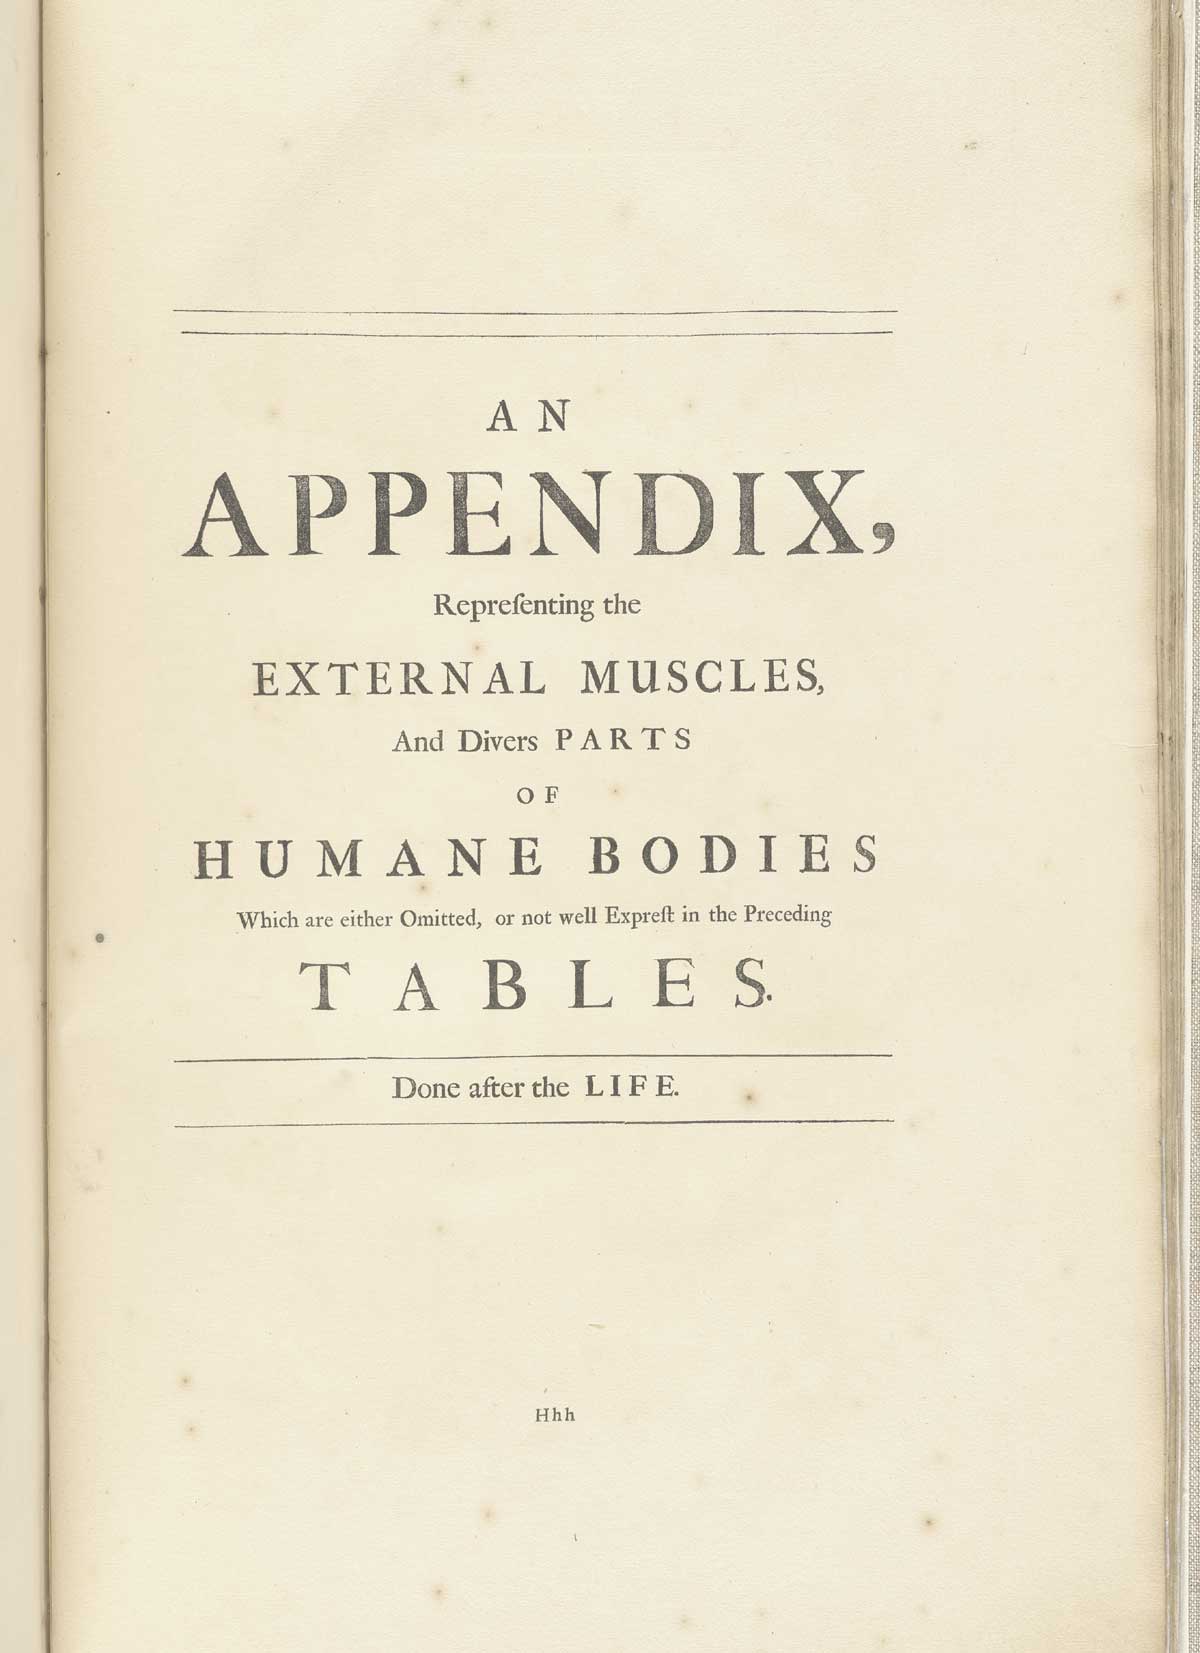 Typeset half title of the “Appendix representing the external muscles, and diverse parts of humane bodies …”, from William Cowper’s Anatomy of the humane bodies, NLM Call no.: WZ 250 C876a 1698.